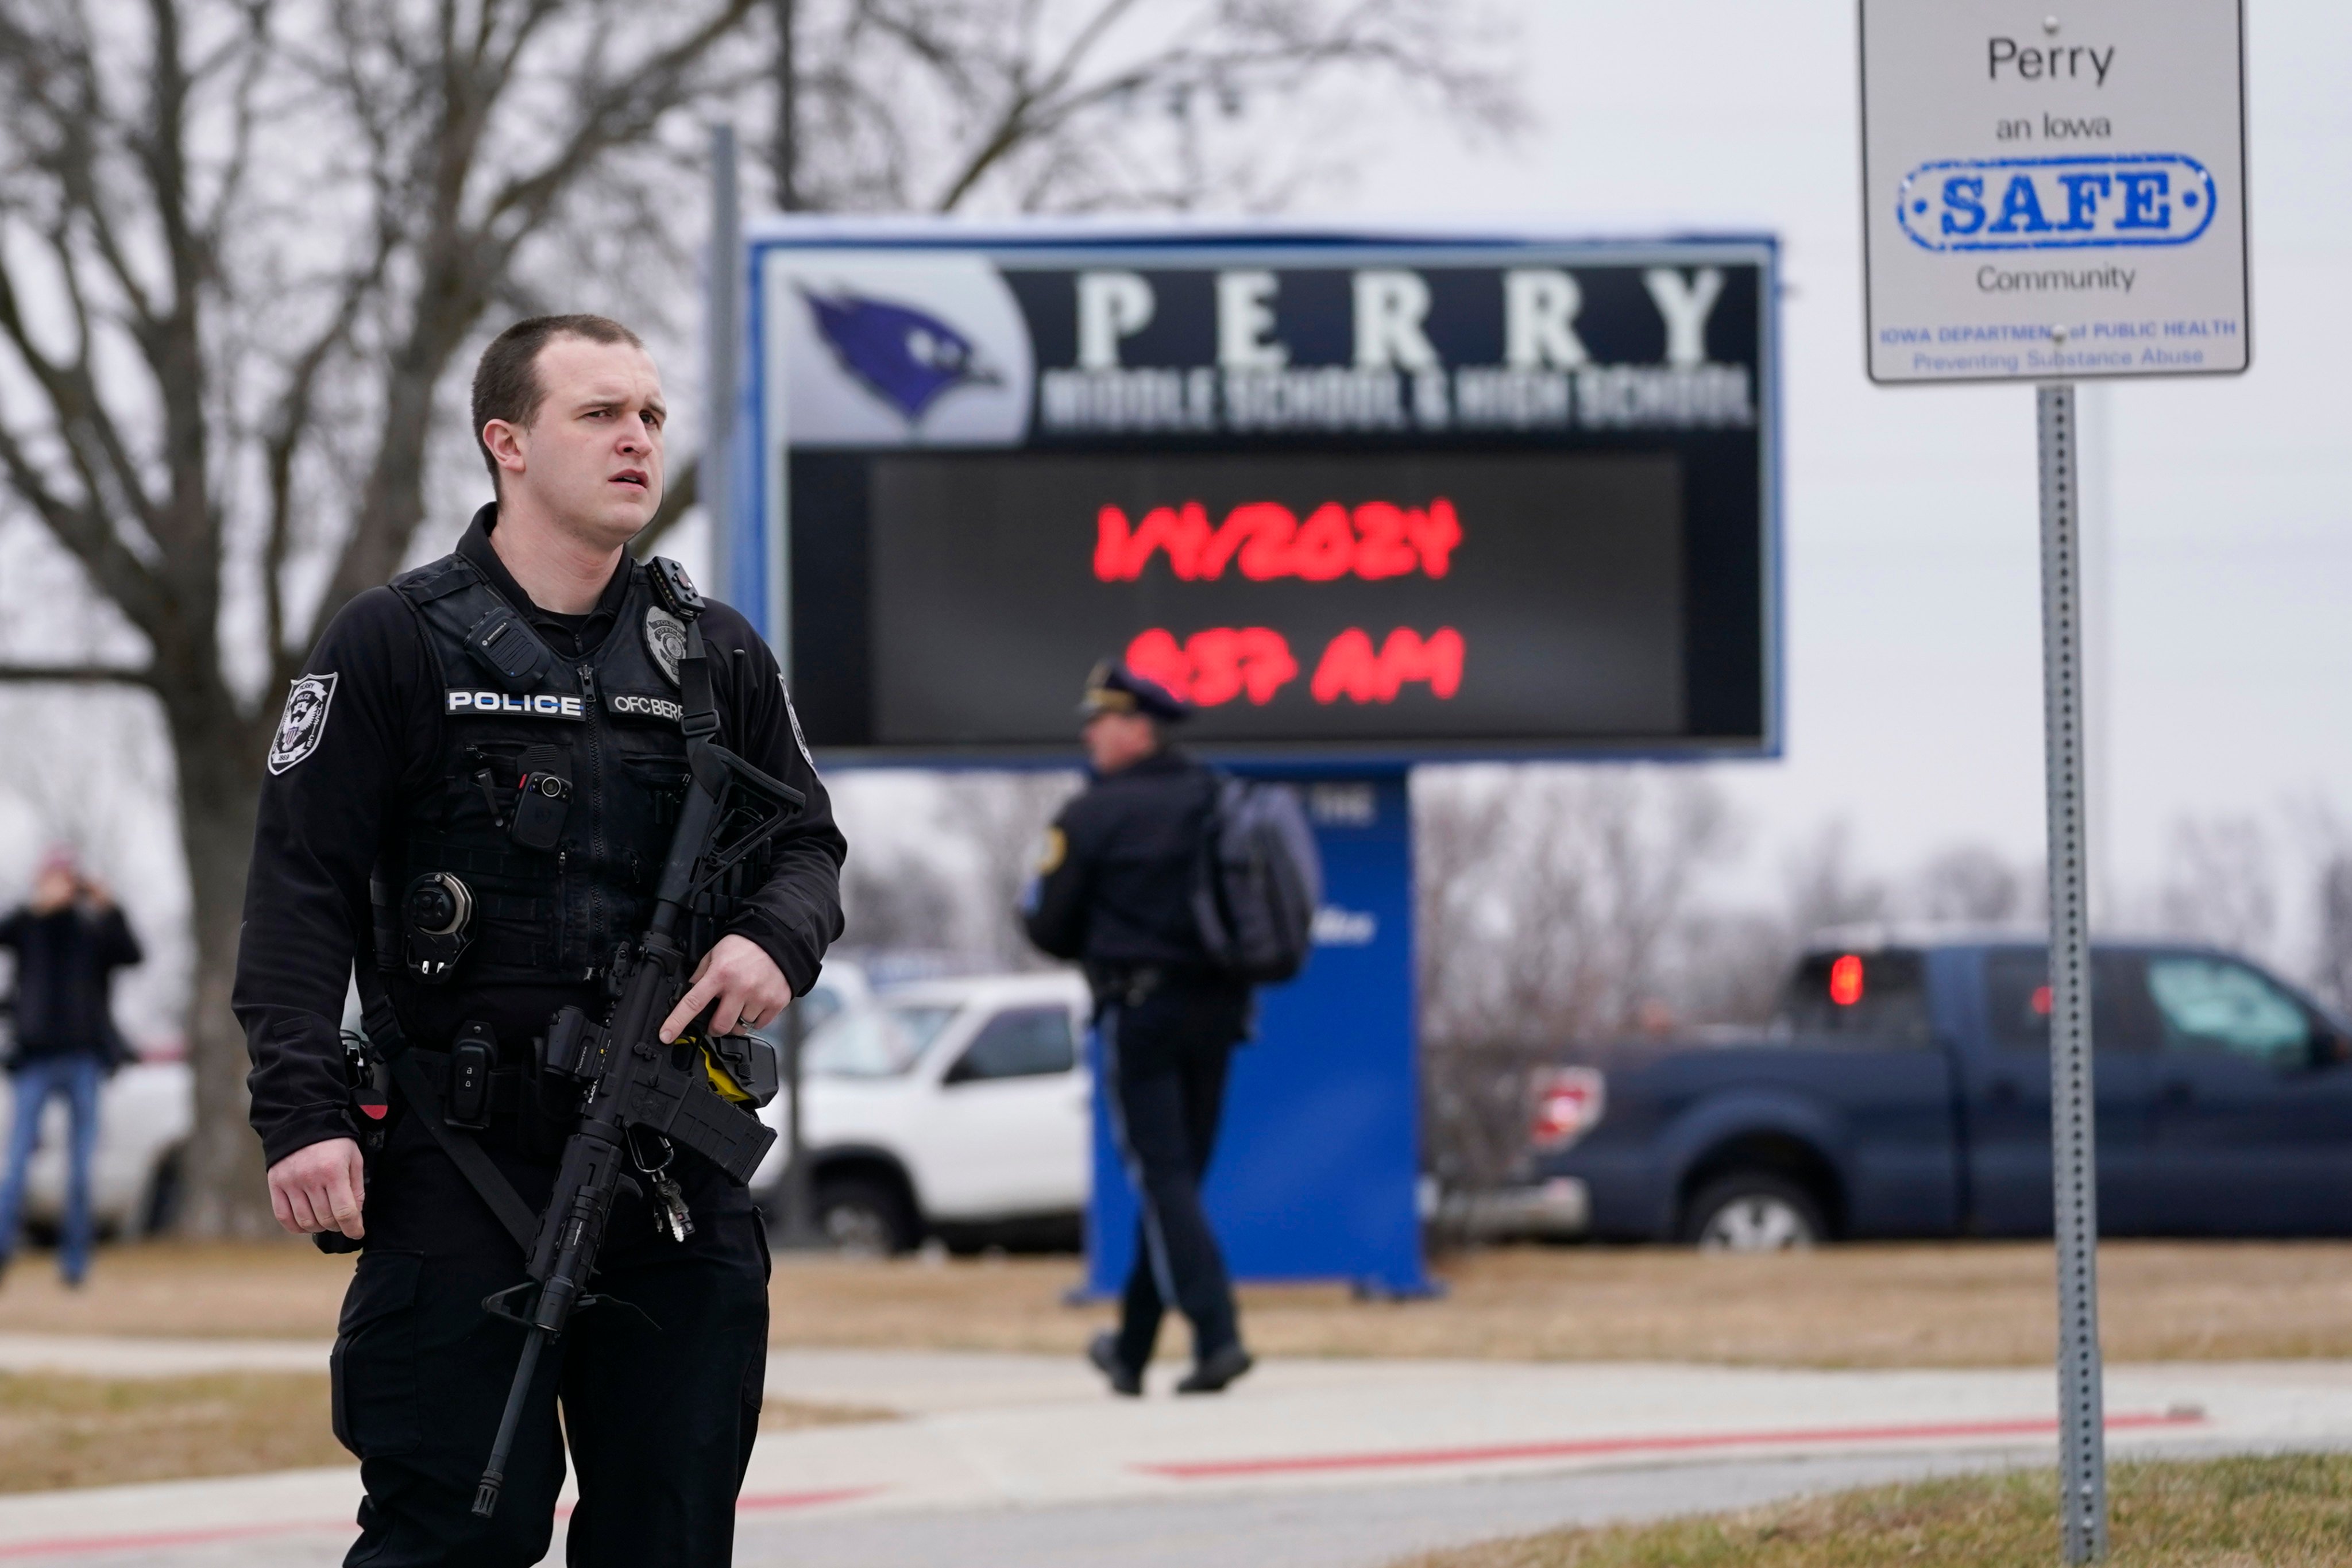 Police at the scene of the shooting in Perry, Iowa. Photo: AP